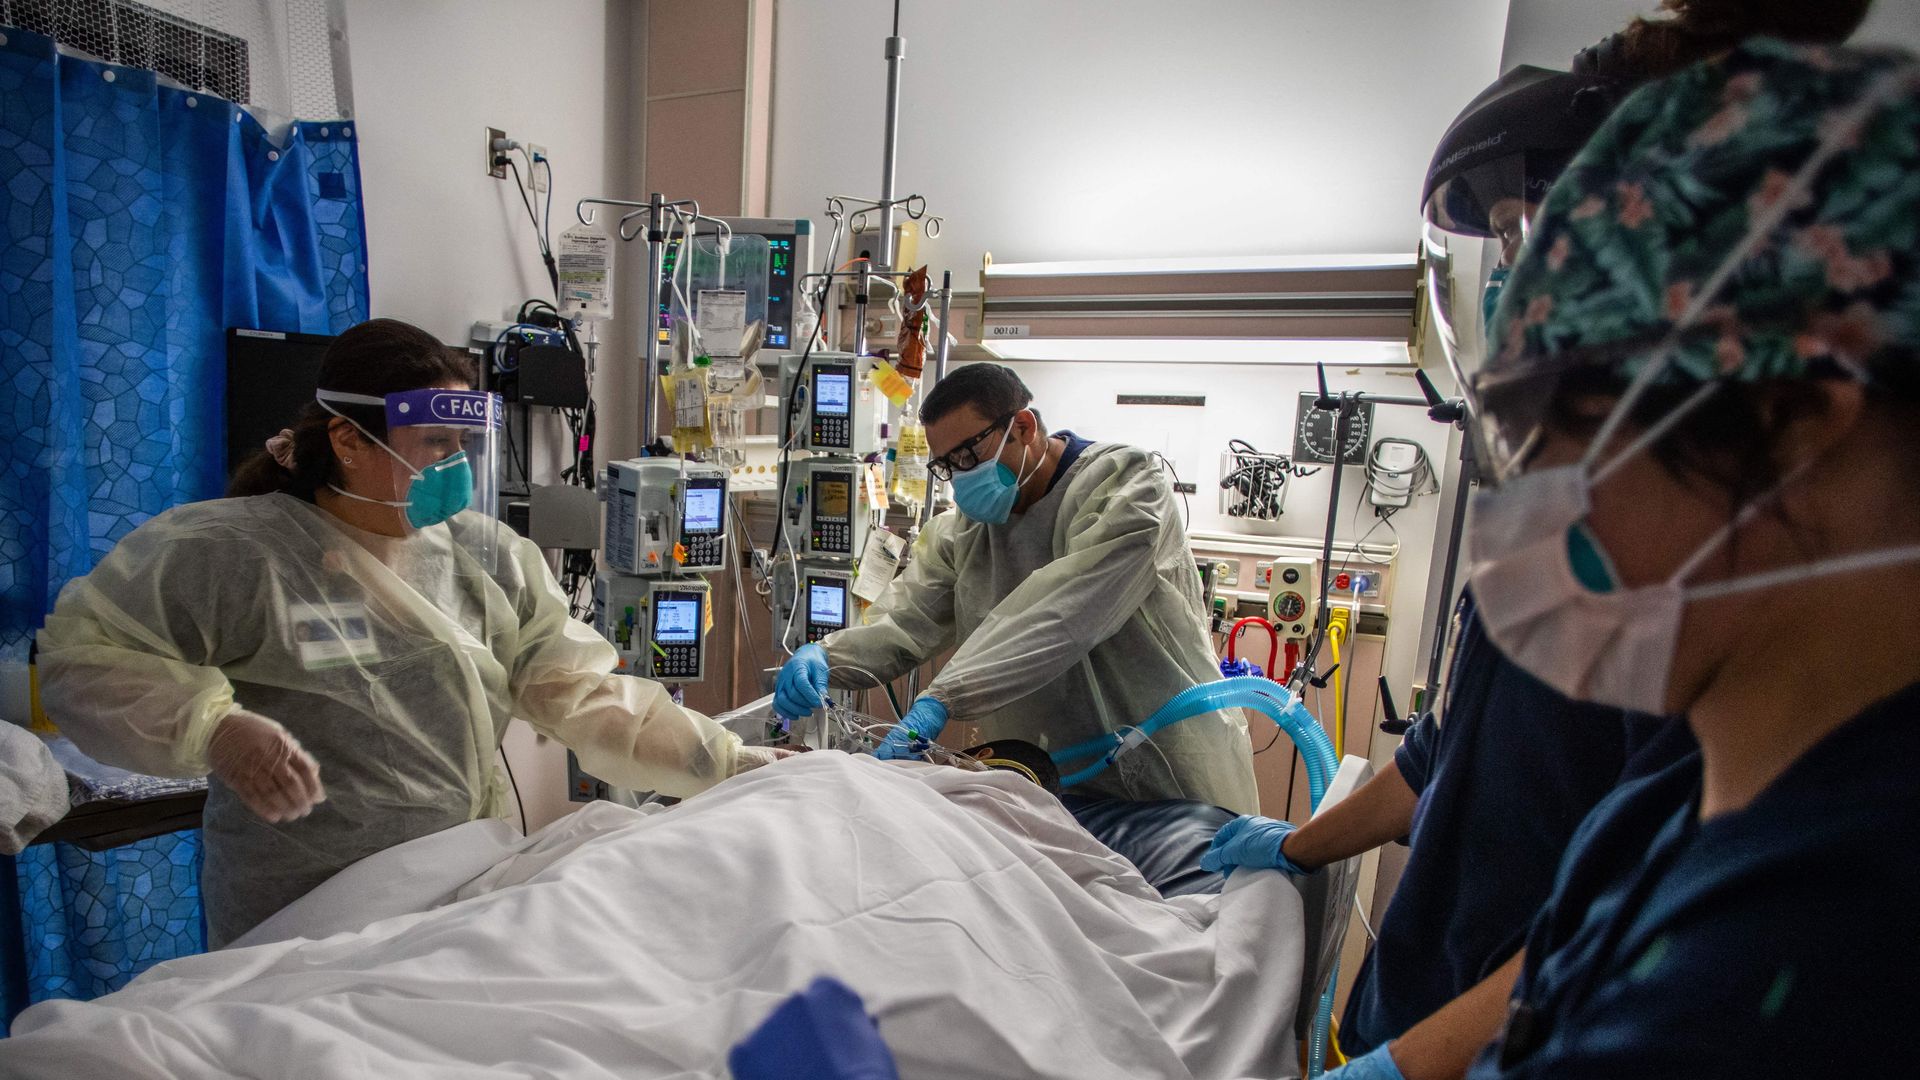 Health care workers in masks and protective gear care for a COVID-19 patient on a hospital bed.